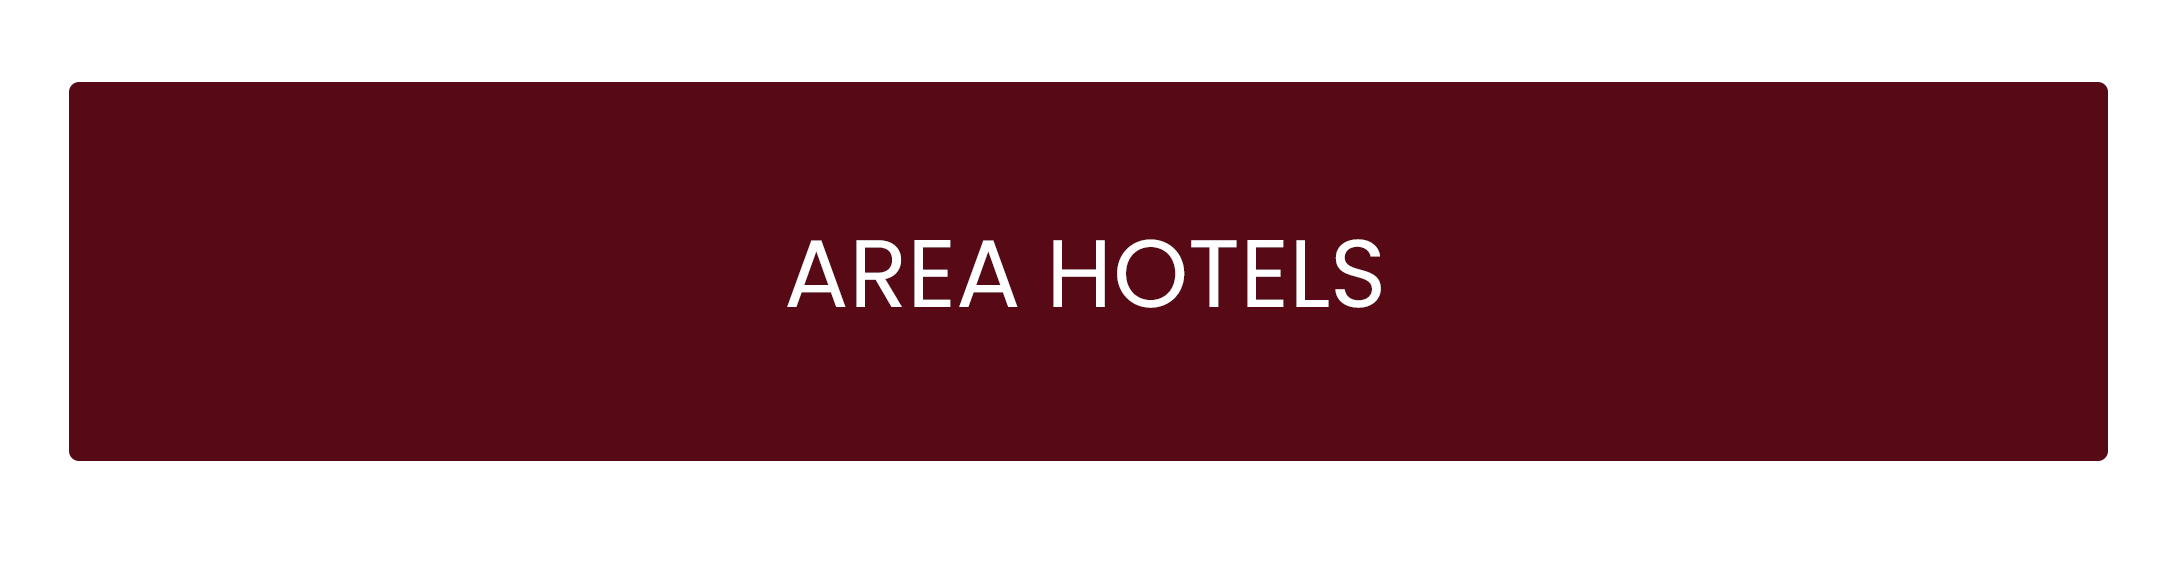 Area Hotels